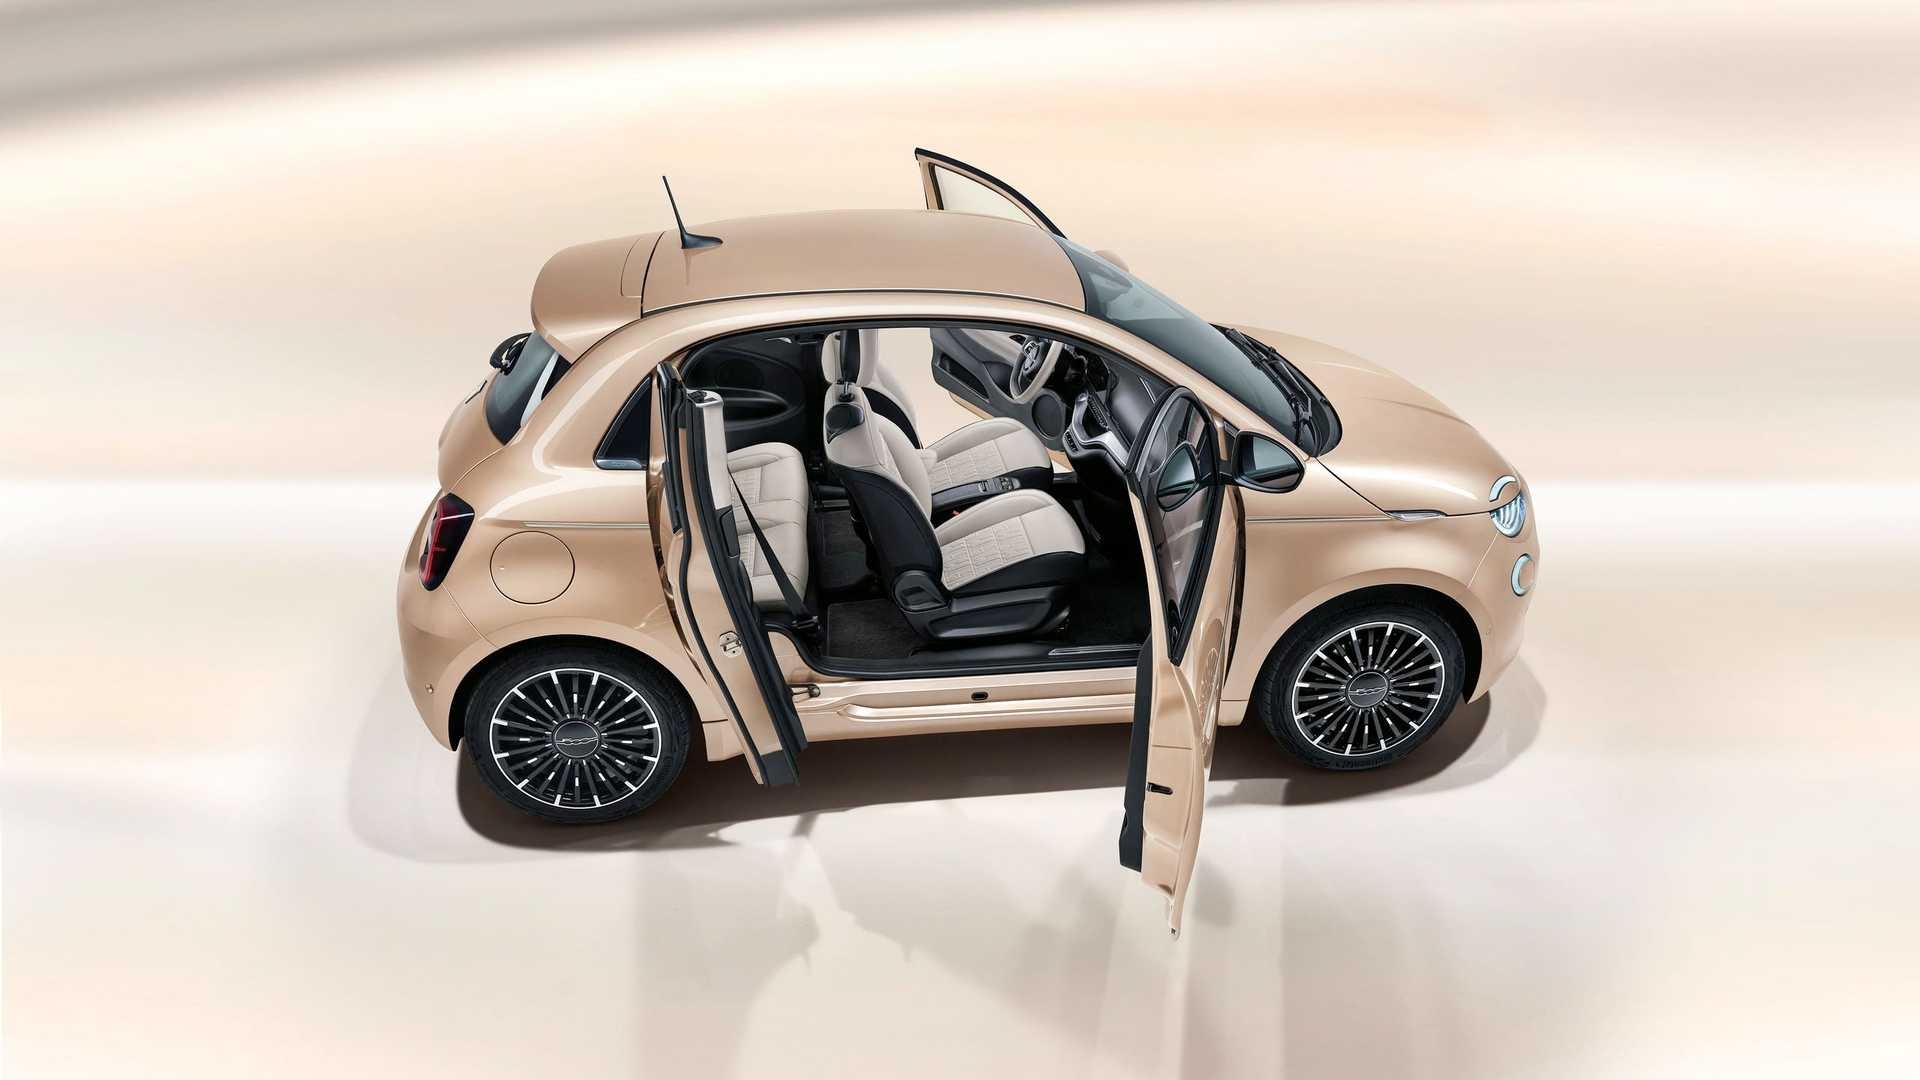 Fiat 500, Electric vehicle, InsideEVs photos, Efficient and eco-friendly, 1920x1080 Full HD Desktop